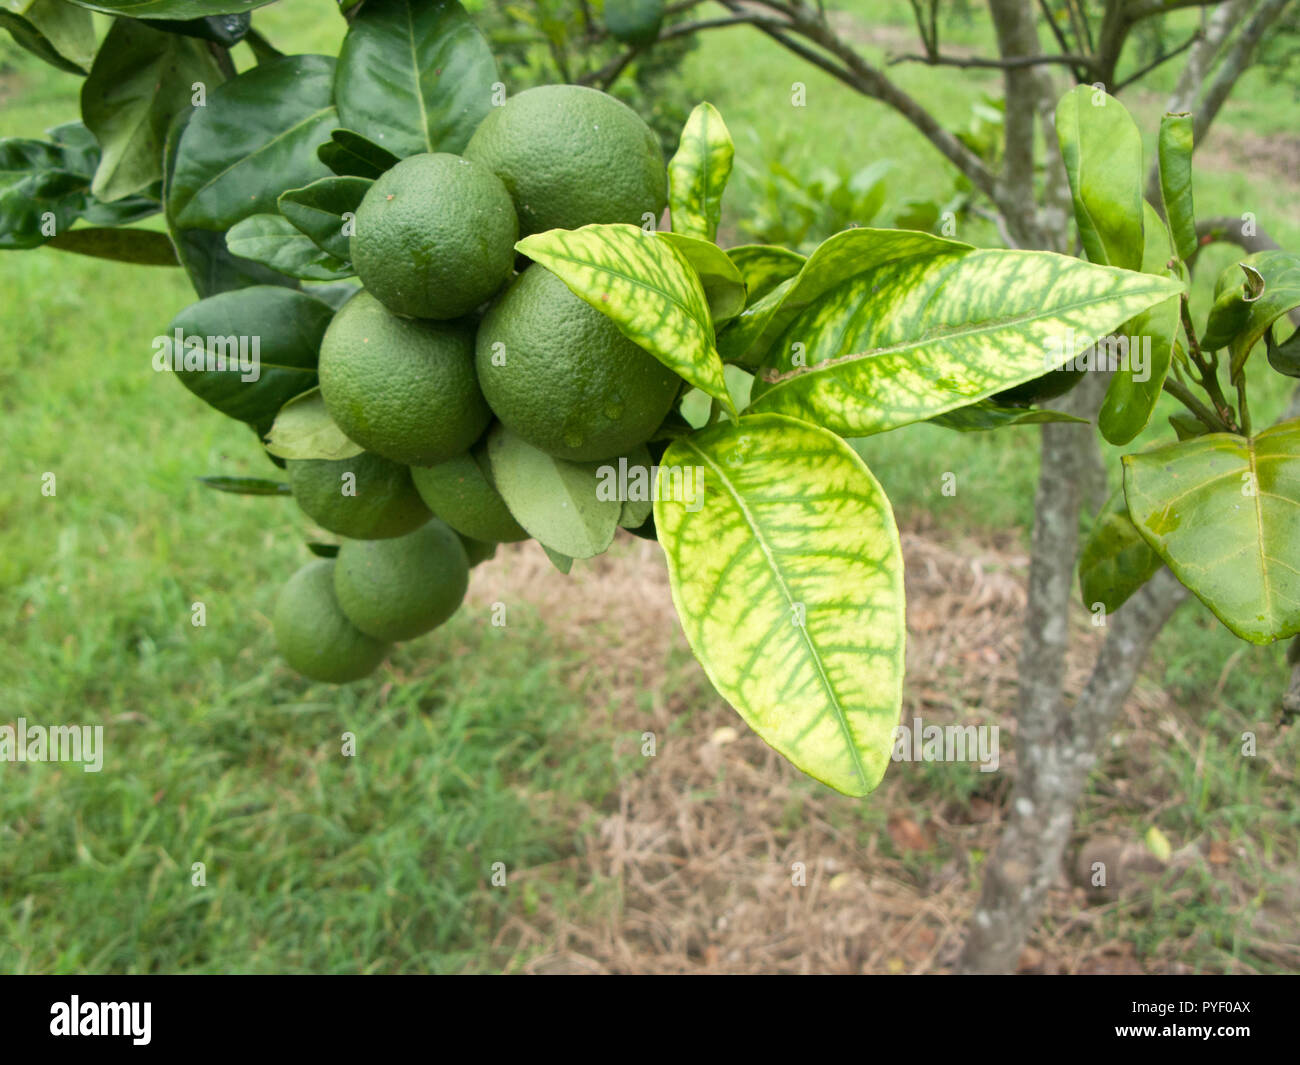 Orange citrus trees orchard heavily  infected with huanglongbing yellow dragon citrus greening plague deadly disease Stock Photo